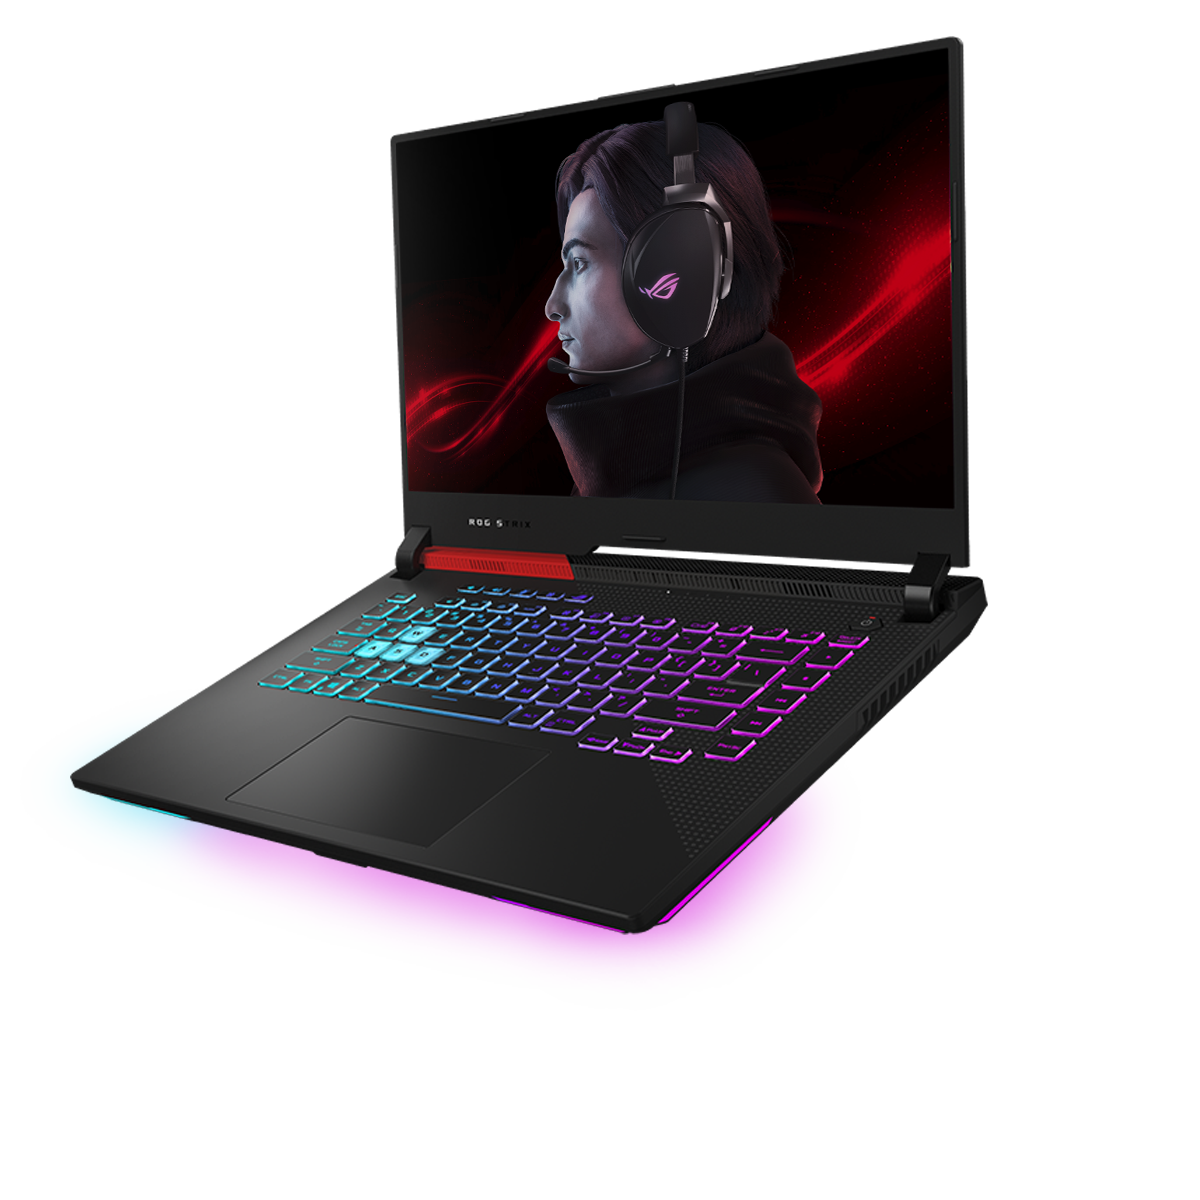 This laptop emits a red sound wave, and its screen displays Scar Runner wearing ROG headphones with a red sound wave graphic in the background.